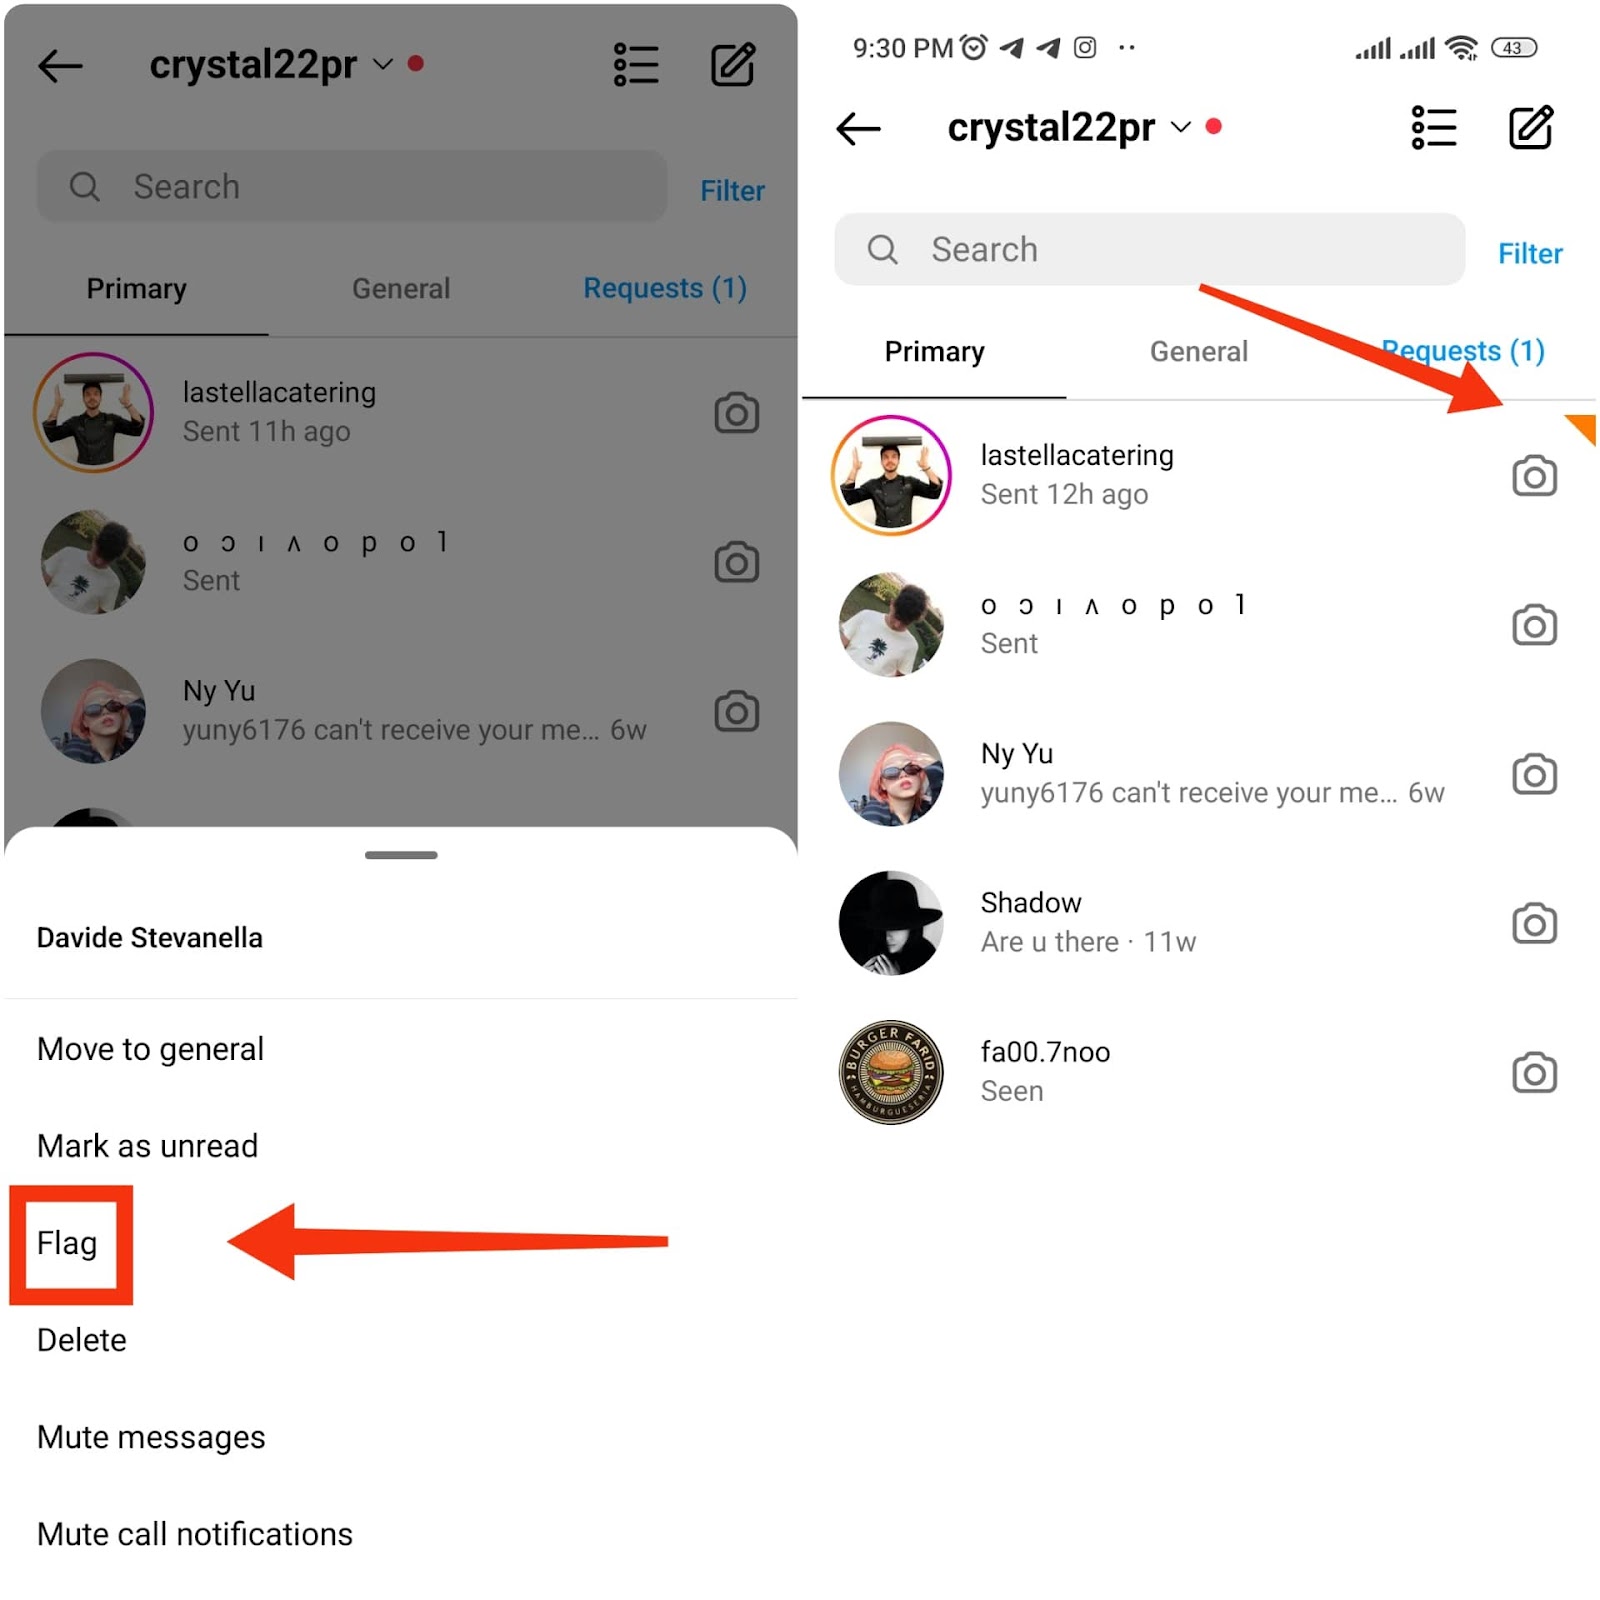 How to flag messages on Instagram 2022